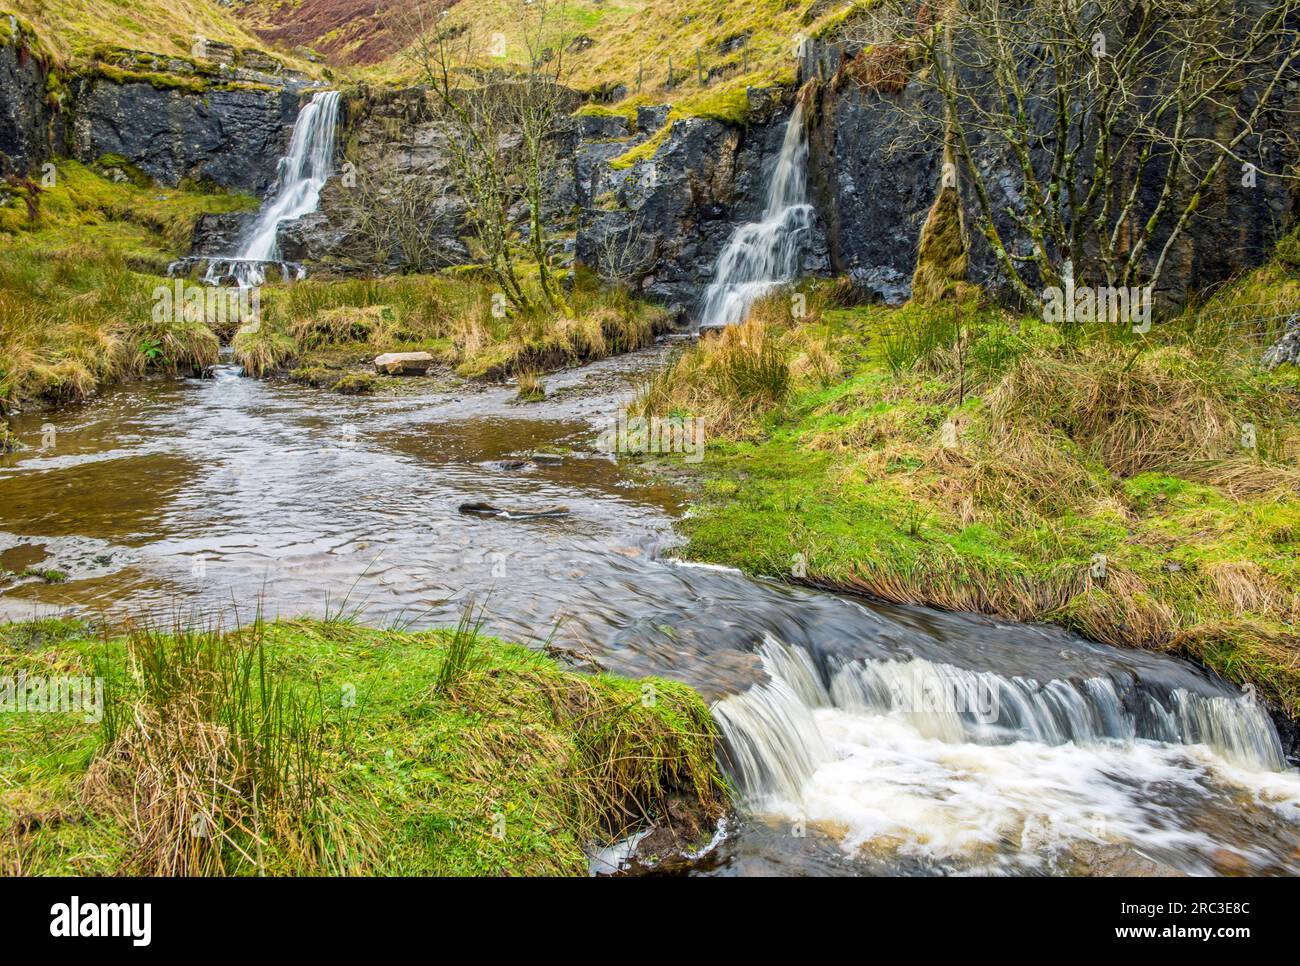 Three Aisgill Waterfalls off the Garsdale to Kirby Stephen Road before heading down to Mallerstang Valley  - all in Cumbria Stock Photo